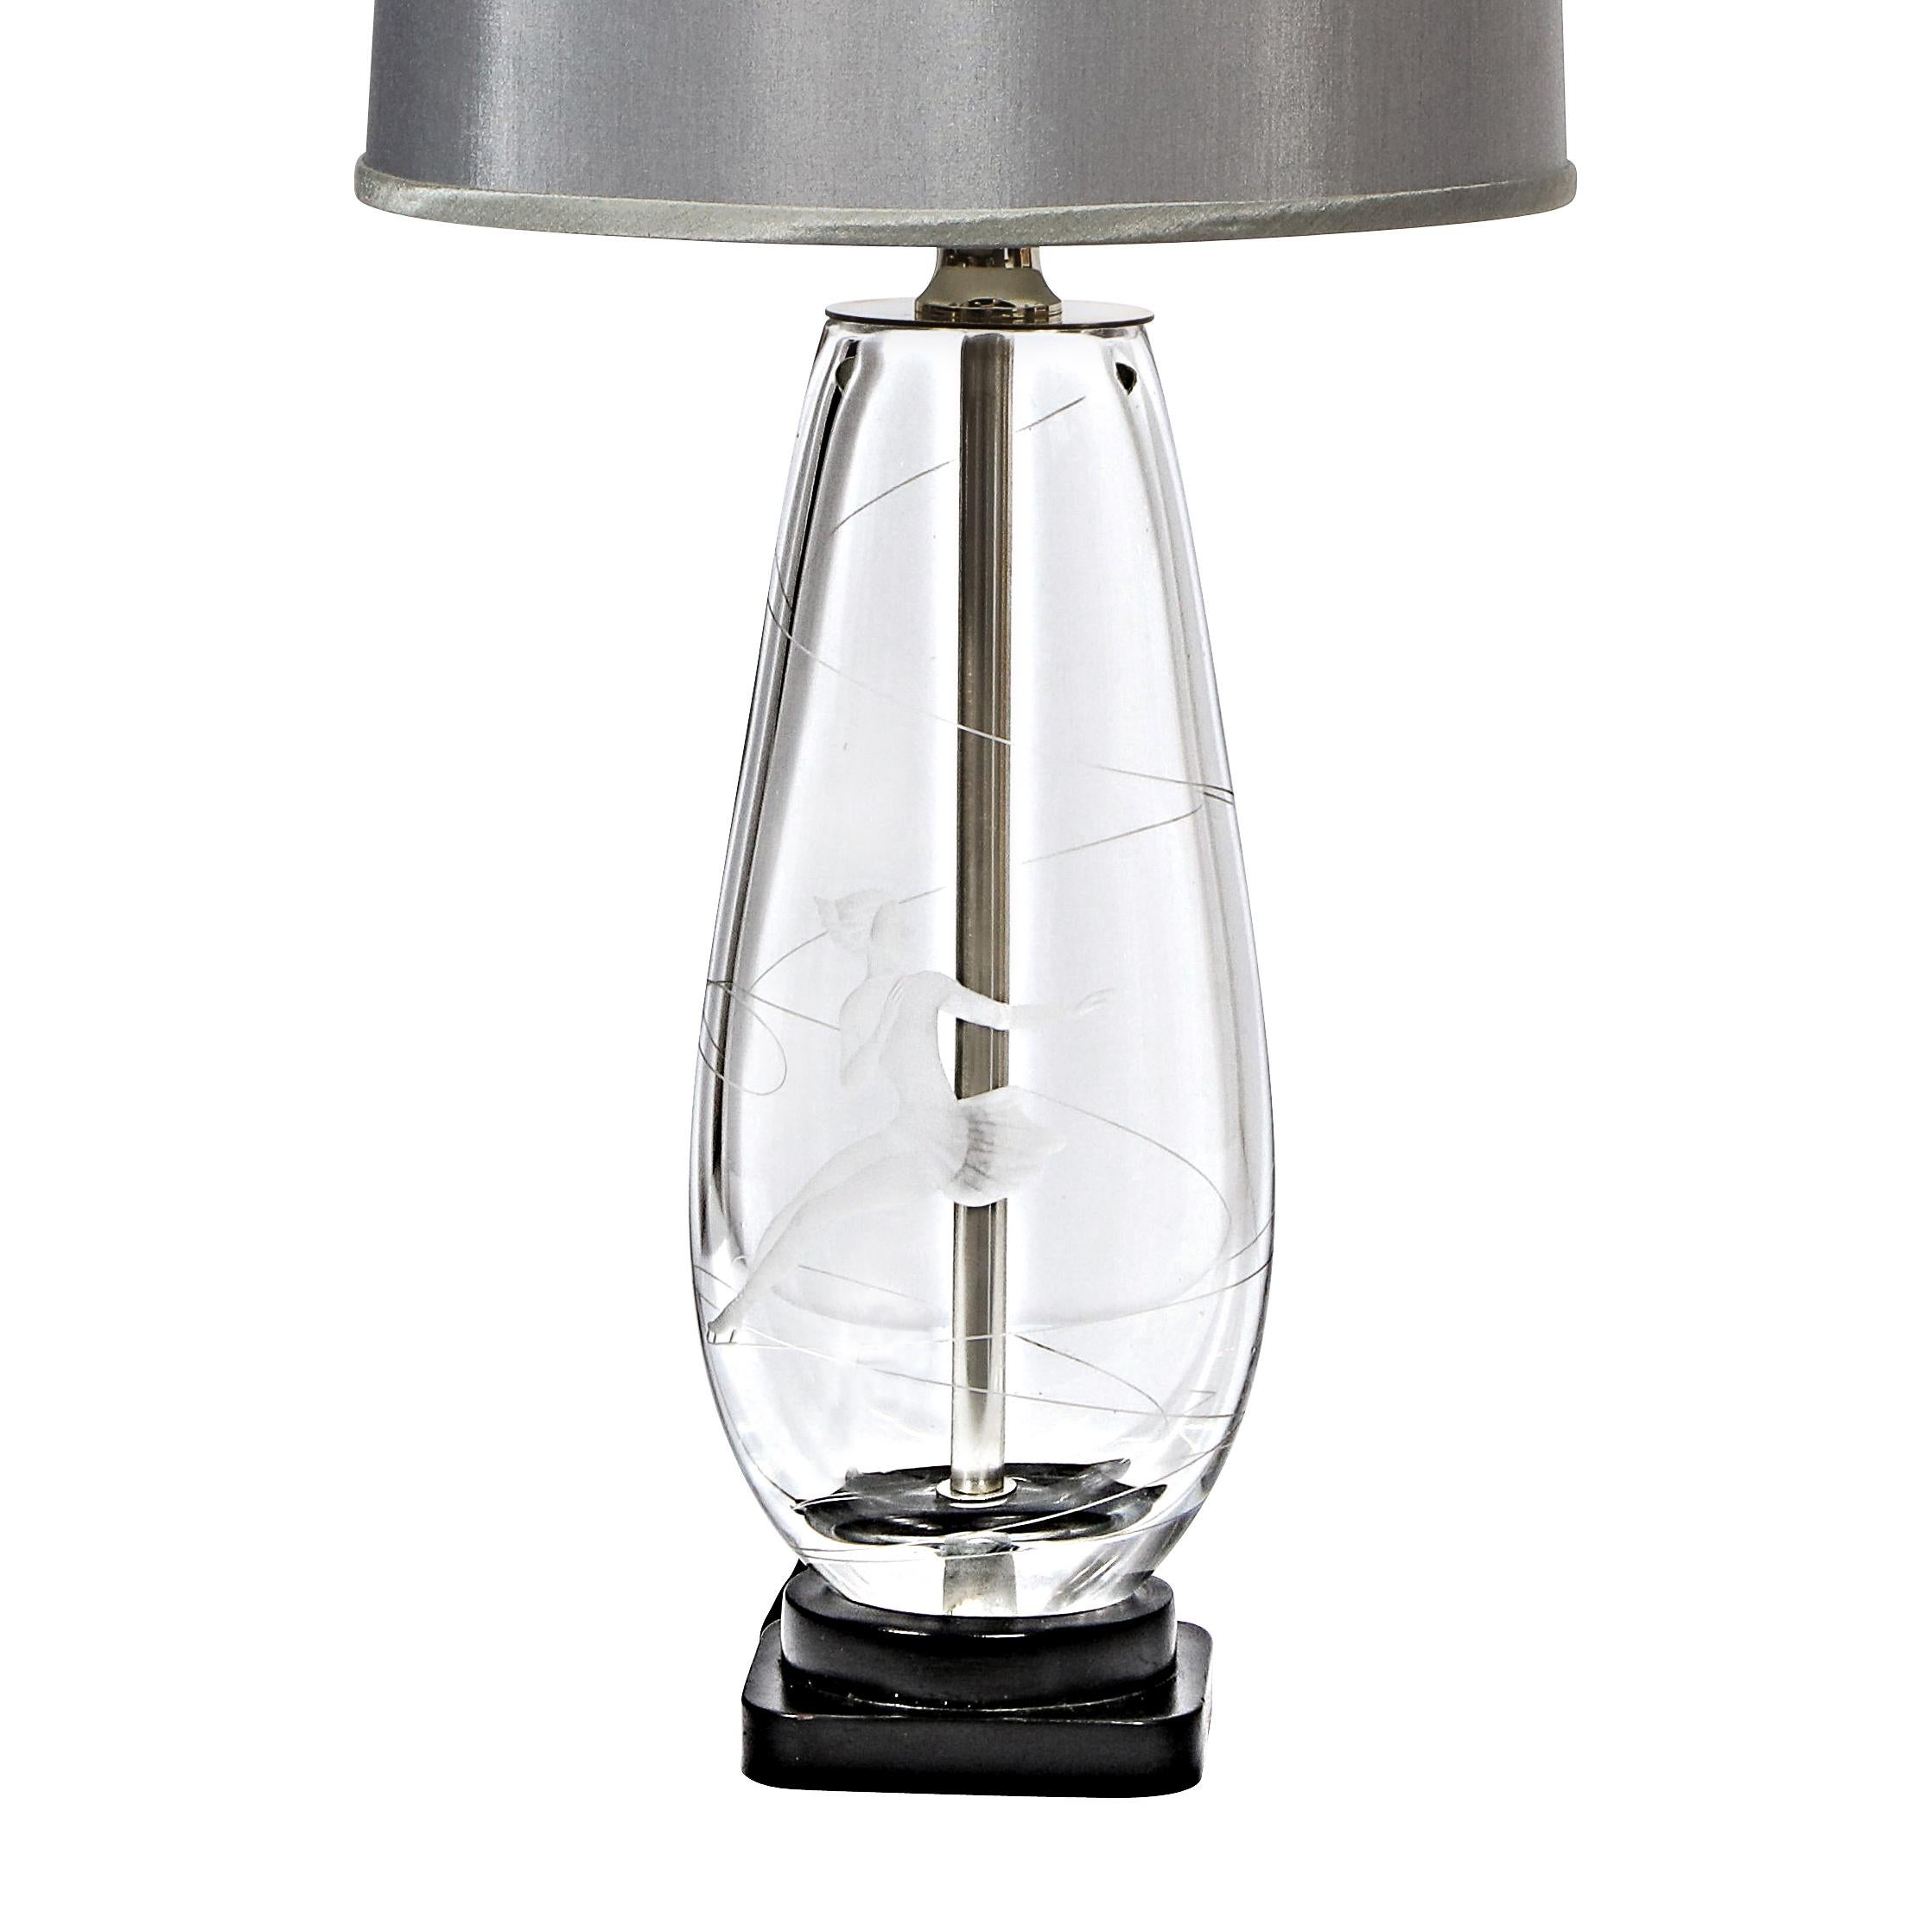 Enamel Mid-Century Modern Translucent & Frosted Glass Figurative Table Lamp by Orrefors For Sale